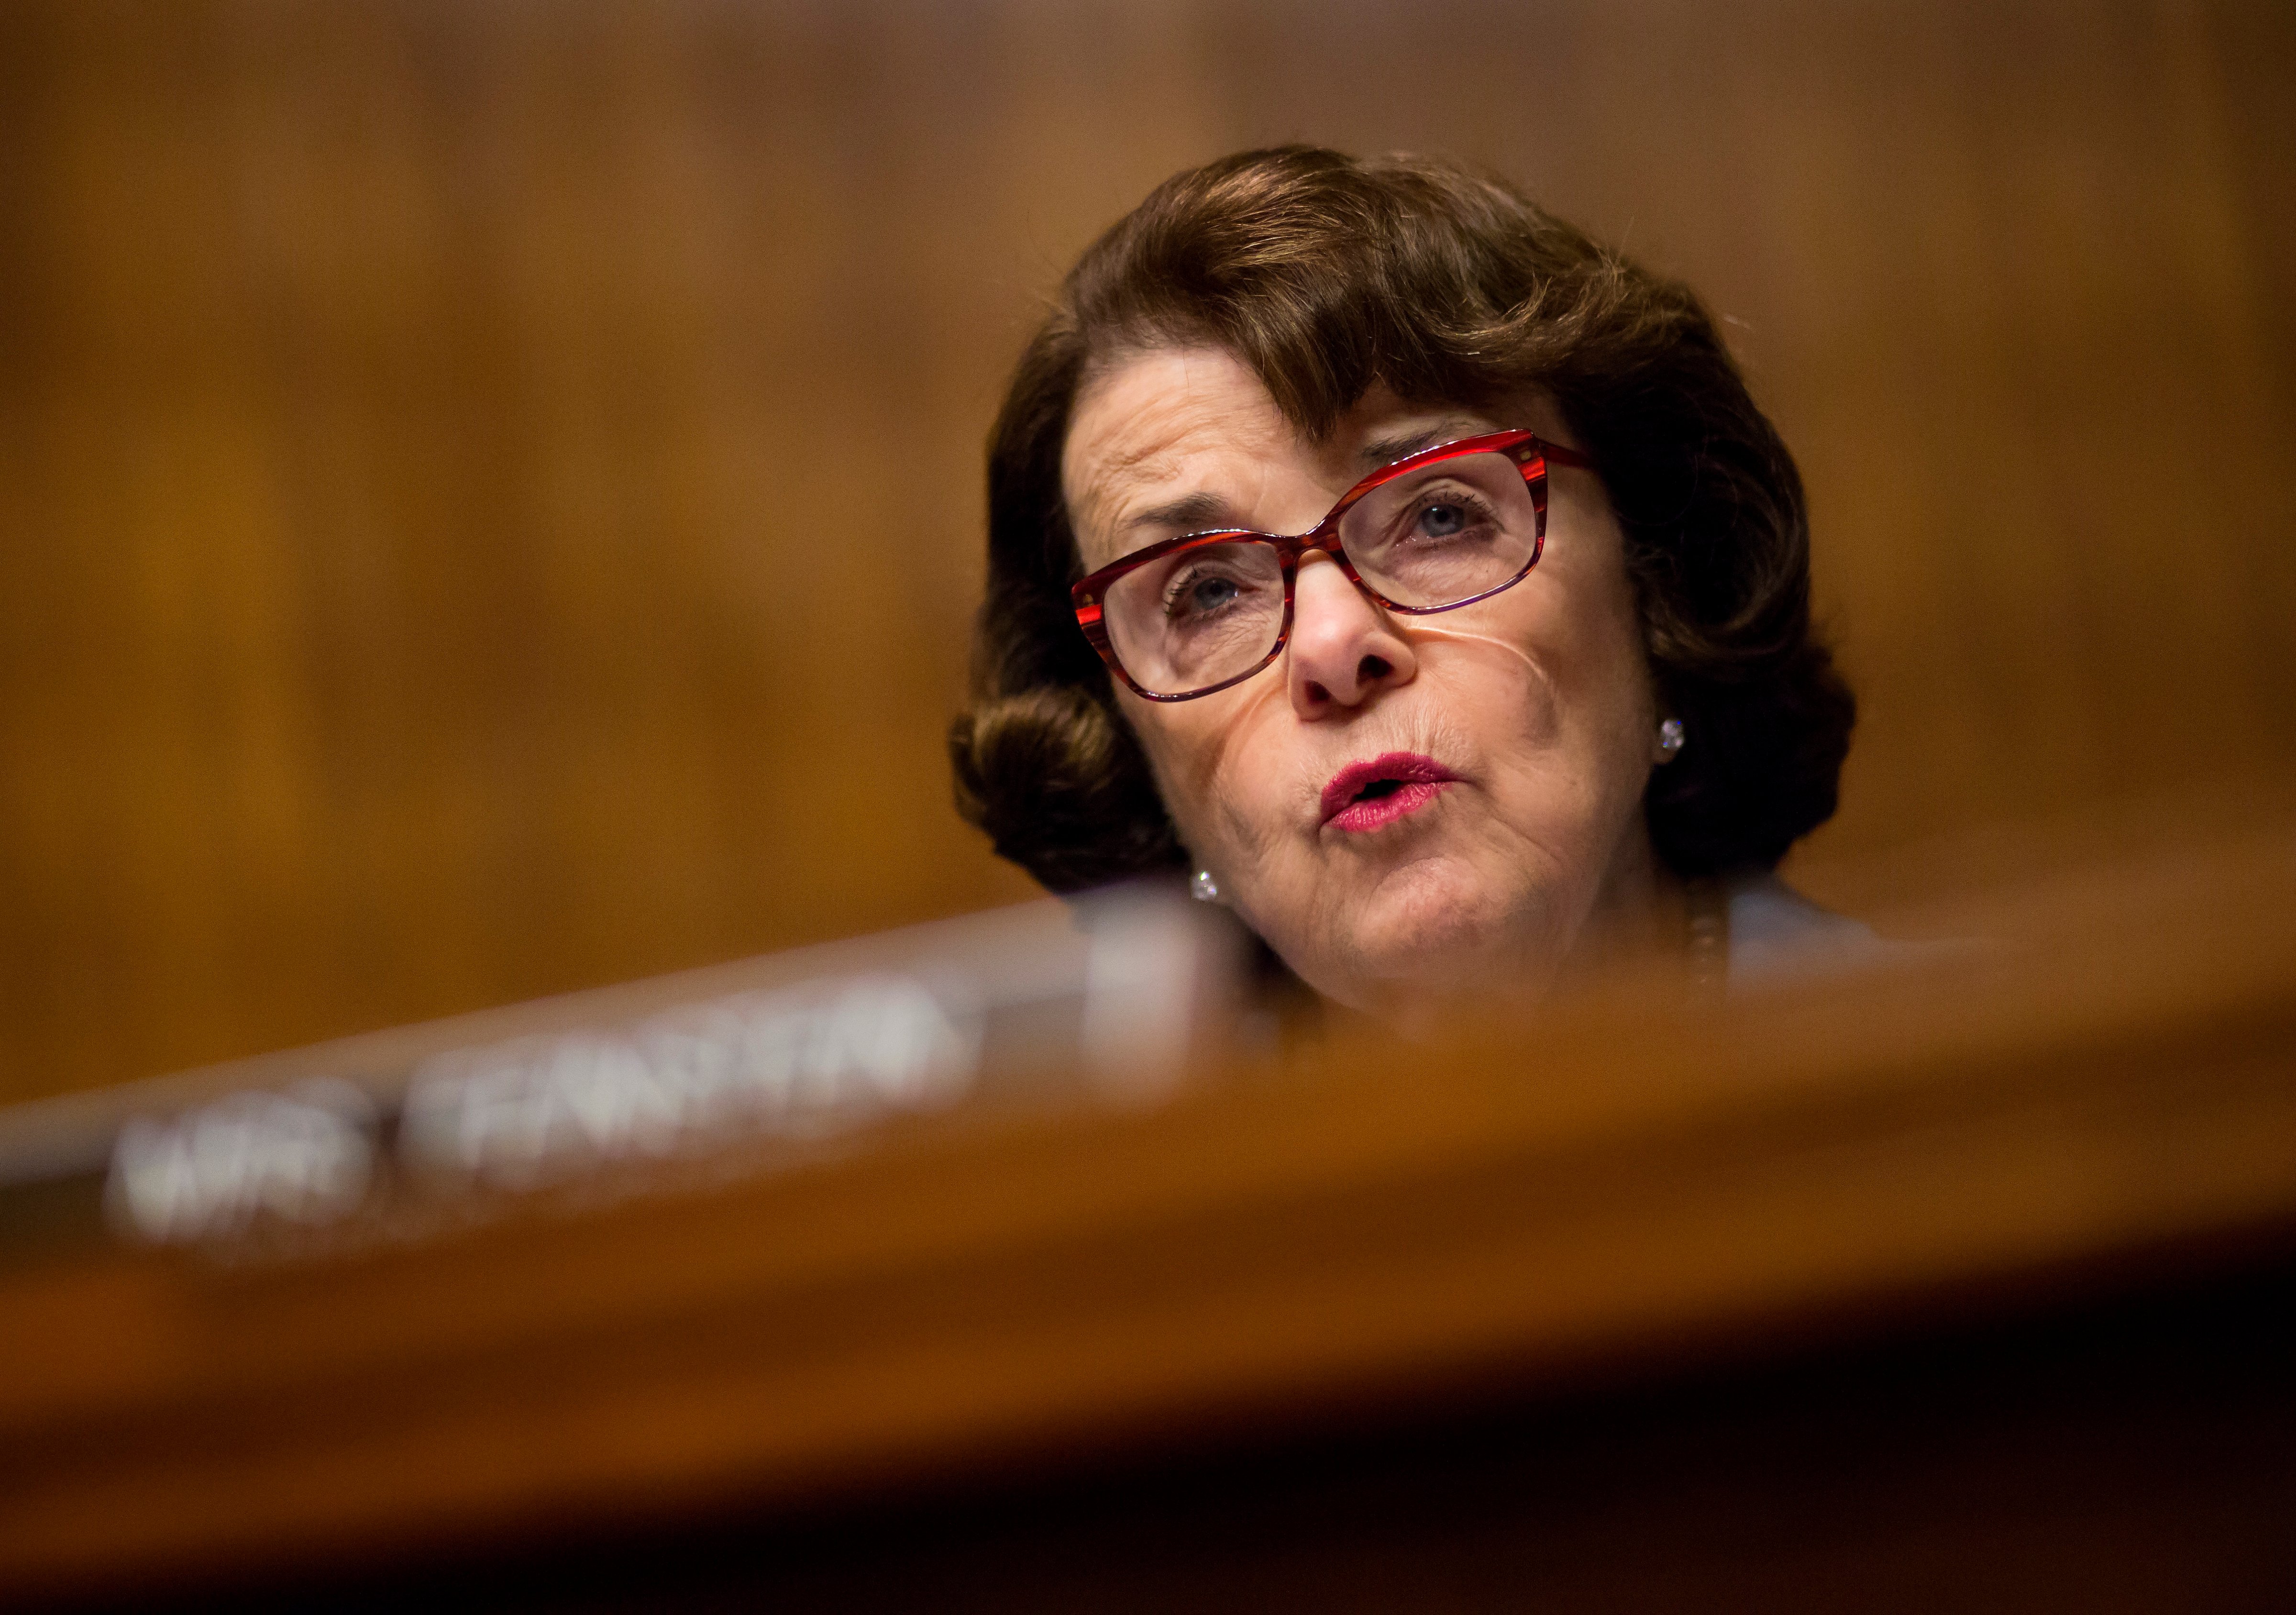 Senate Judiciary member Sen. Sen. Dianne Feinstein (D-CA) questions Director of the Federal Bureau of Investigation, James Comey during an oversight hearing on the FBI on Capitol Hill May 3, 2017 in Washington, DC. (Eric Thayer—Getty Images)